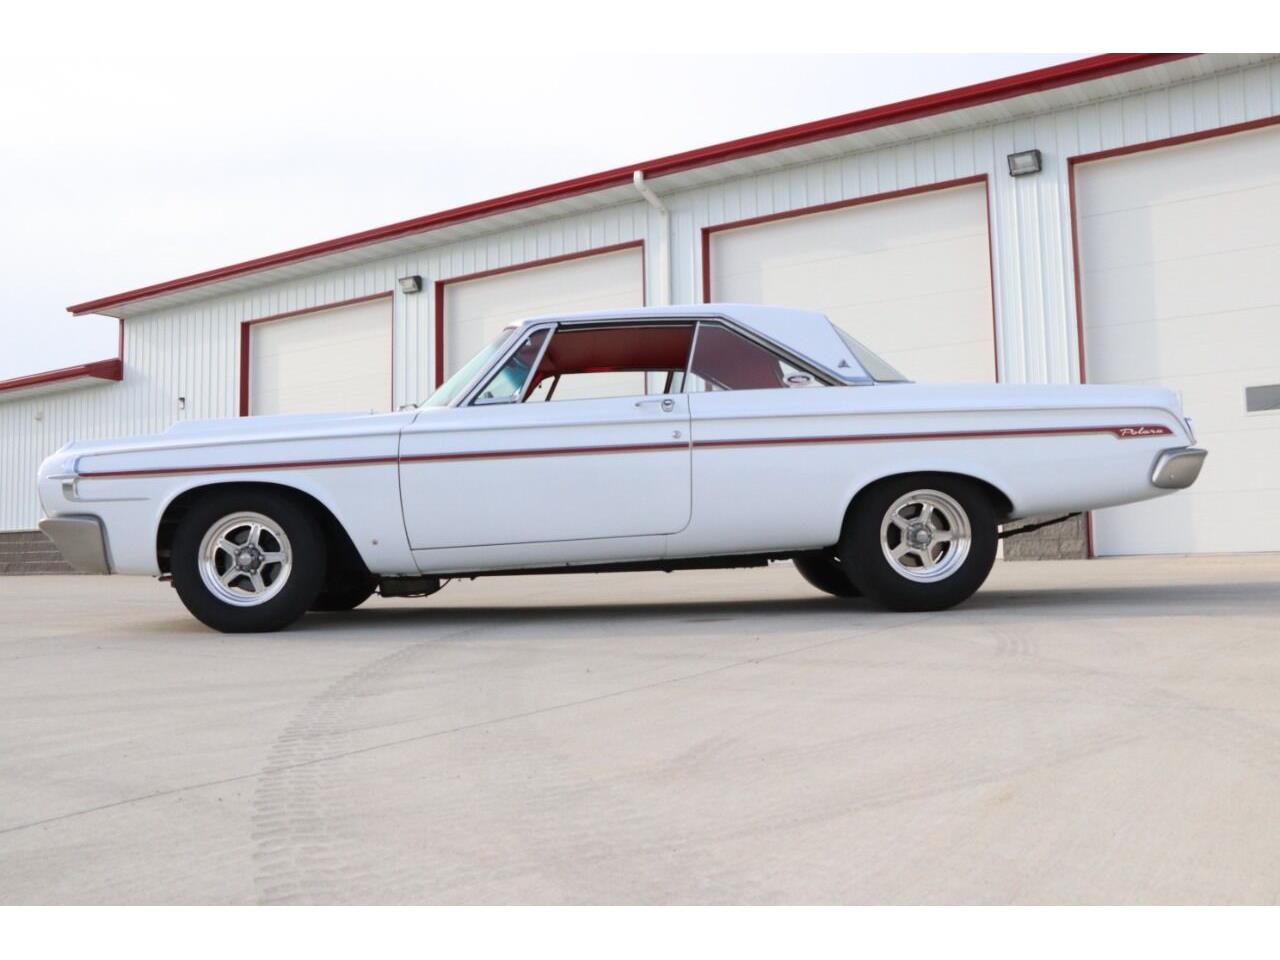 For Sale: 1964 Dodge Polara in Clarence, Iowa for sale in Clarence, IA